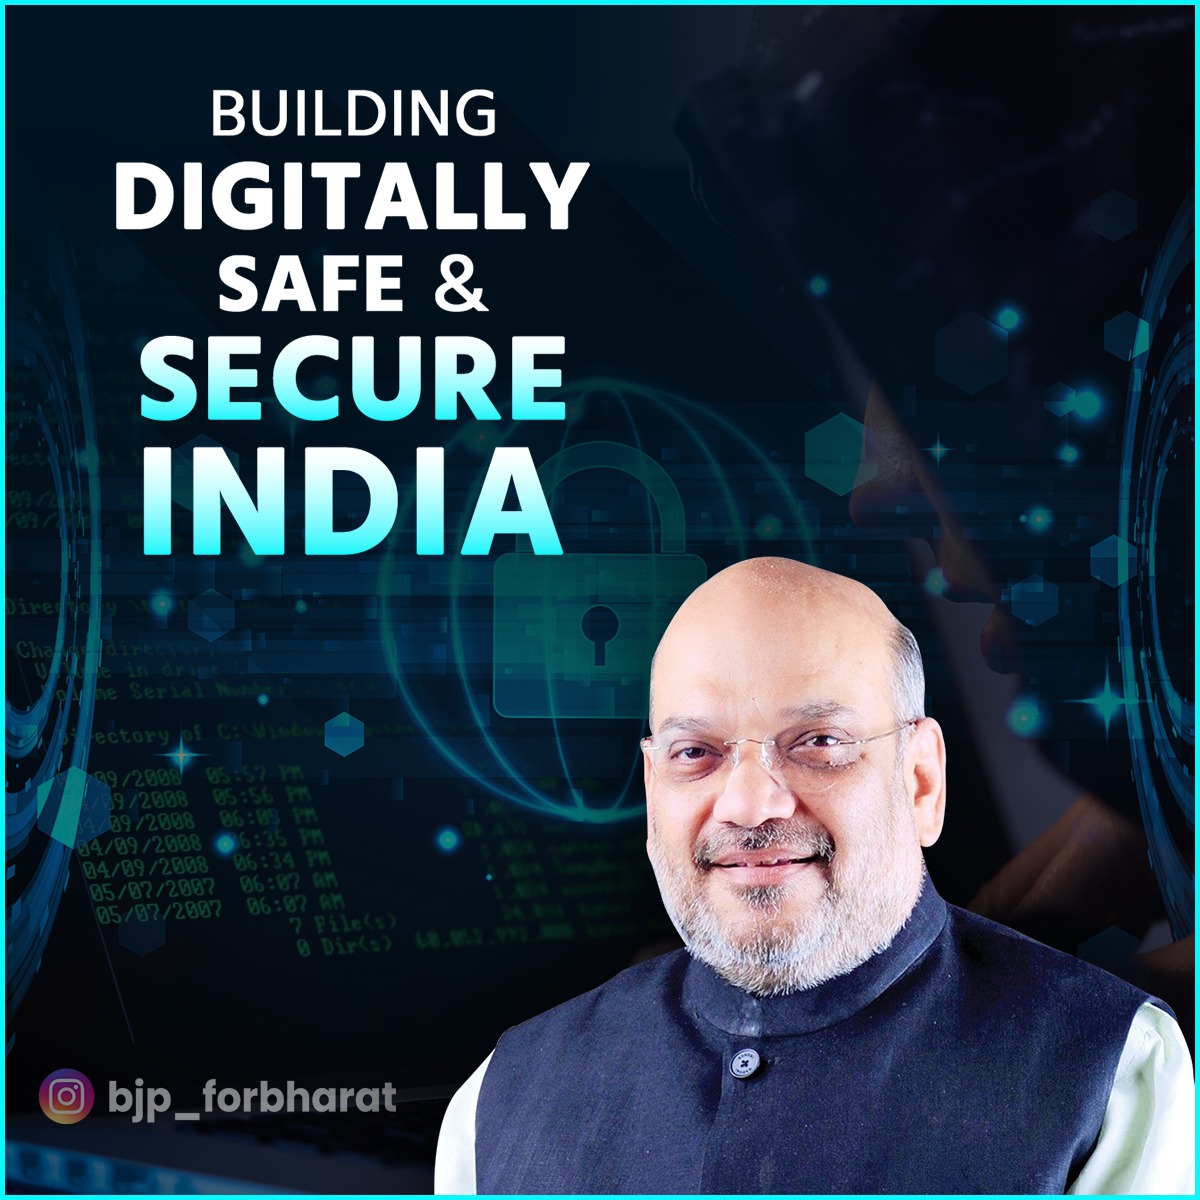 Amit Shah and PM Modi ensure a secure future for India in cyber space

#CCTNS #CyberCrime #CyberHygiene #CyberSpace #RealTimeReporting #AmitShah #FansOfAmitShah #TeamAmitShah #bjp #JahanShahWahanRaah #bjp4india  #bjp_forbharat